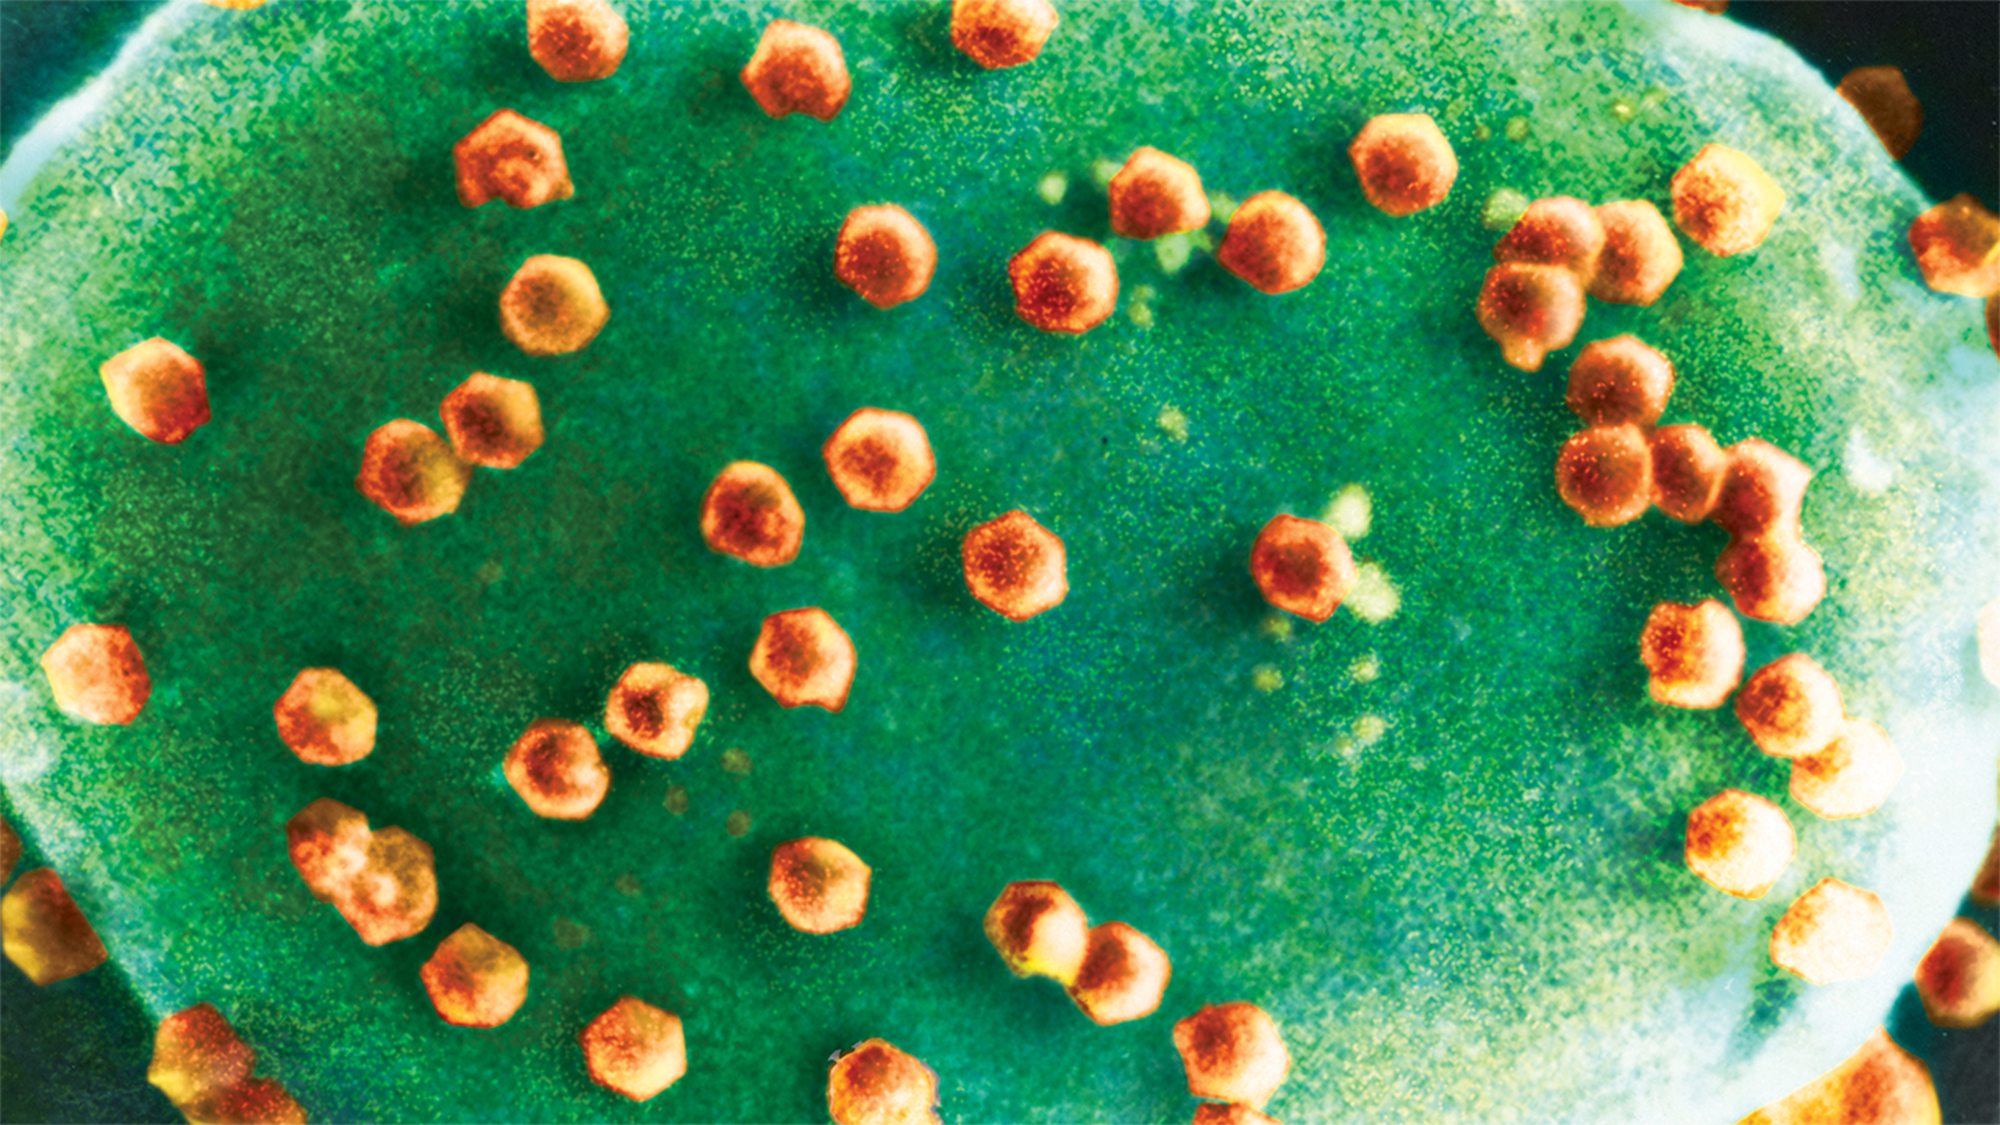 These microbes could be the first lifeforms to munch on infectious viruses